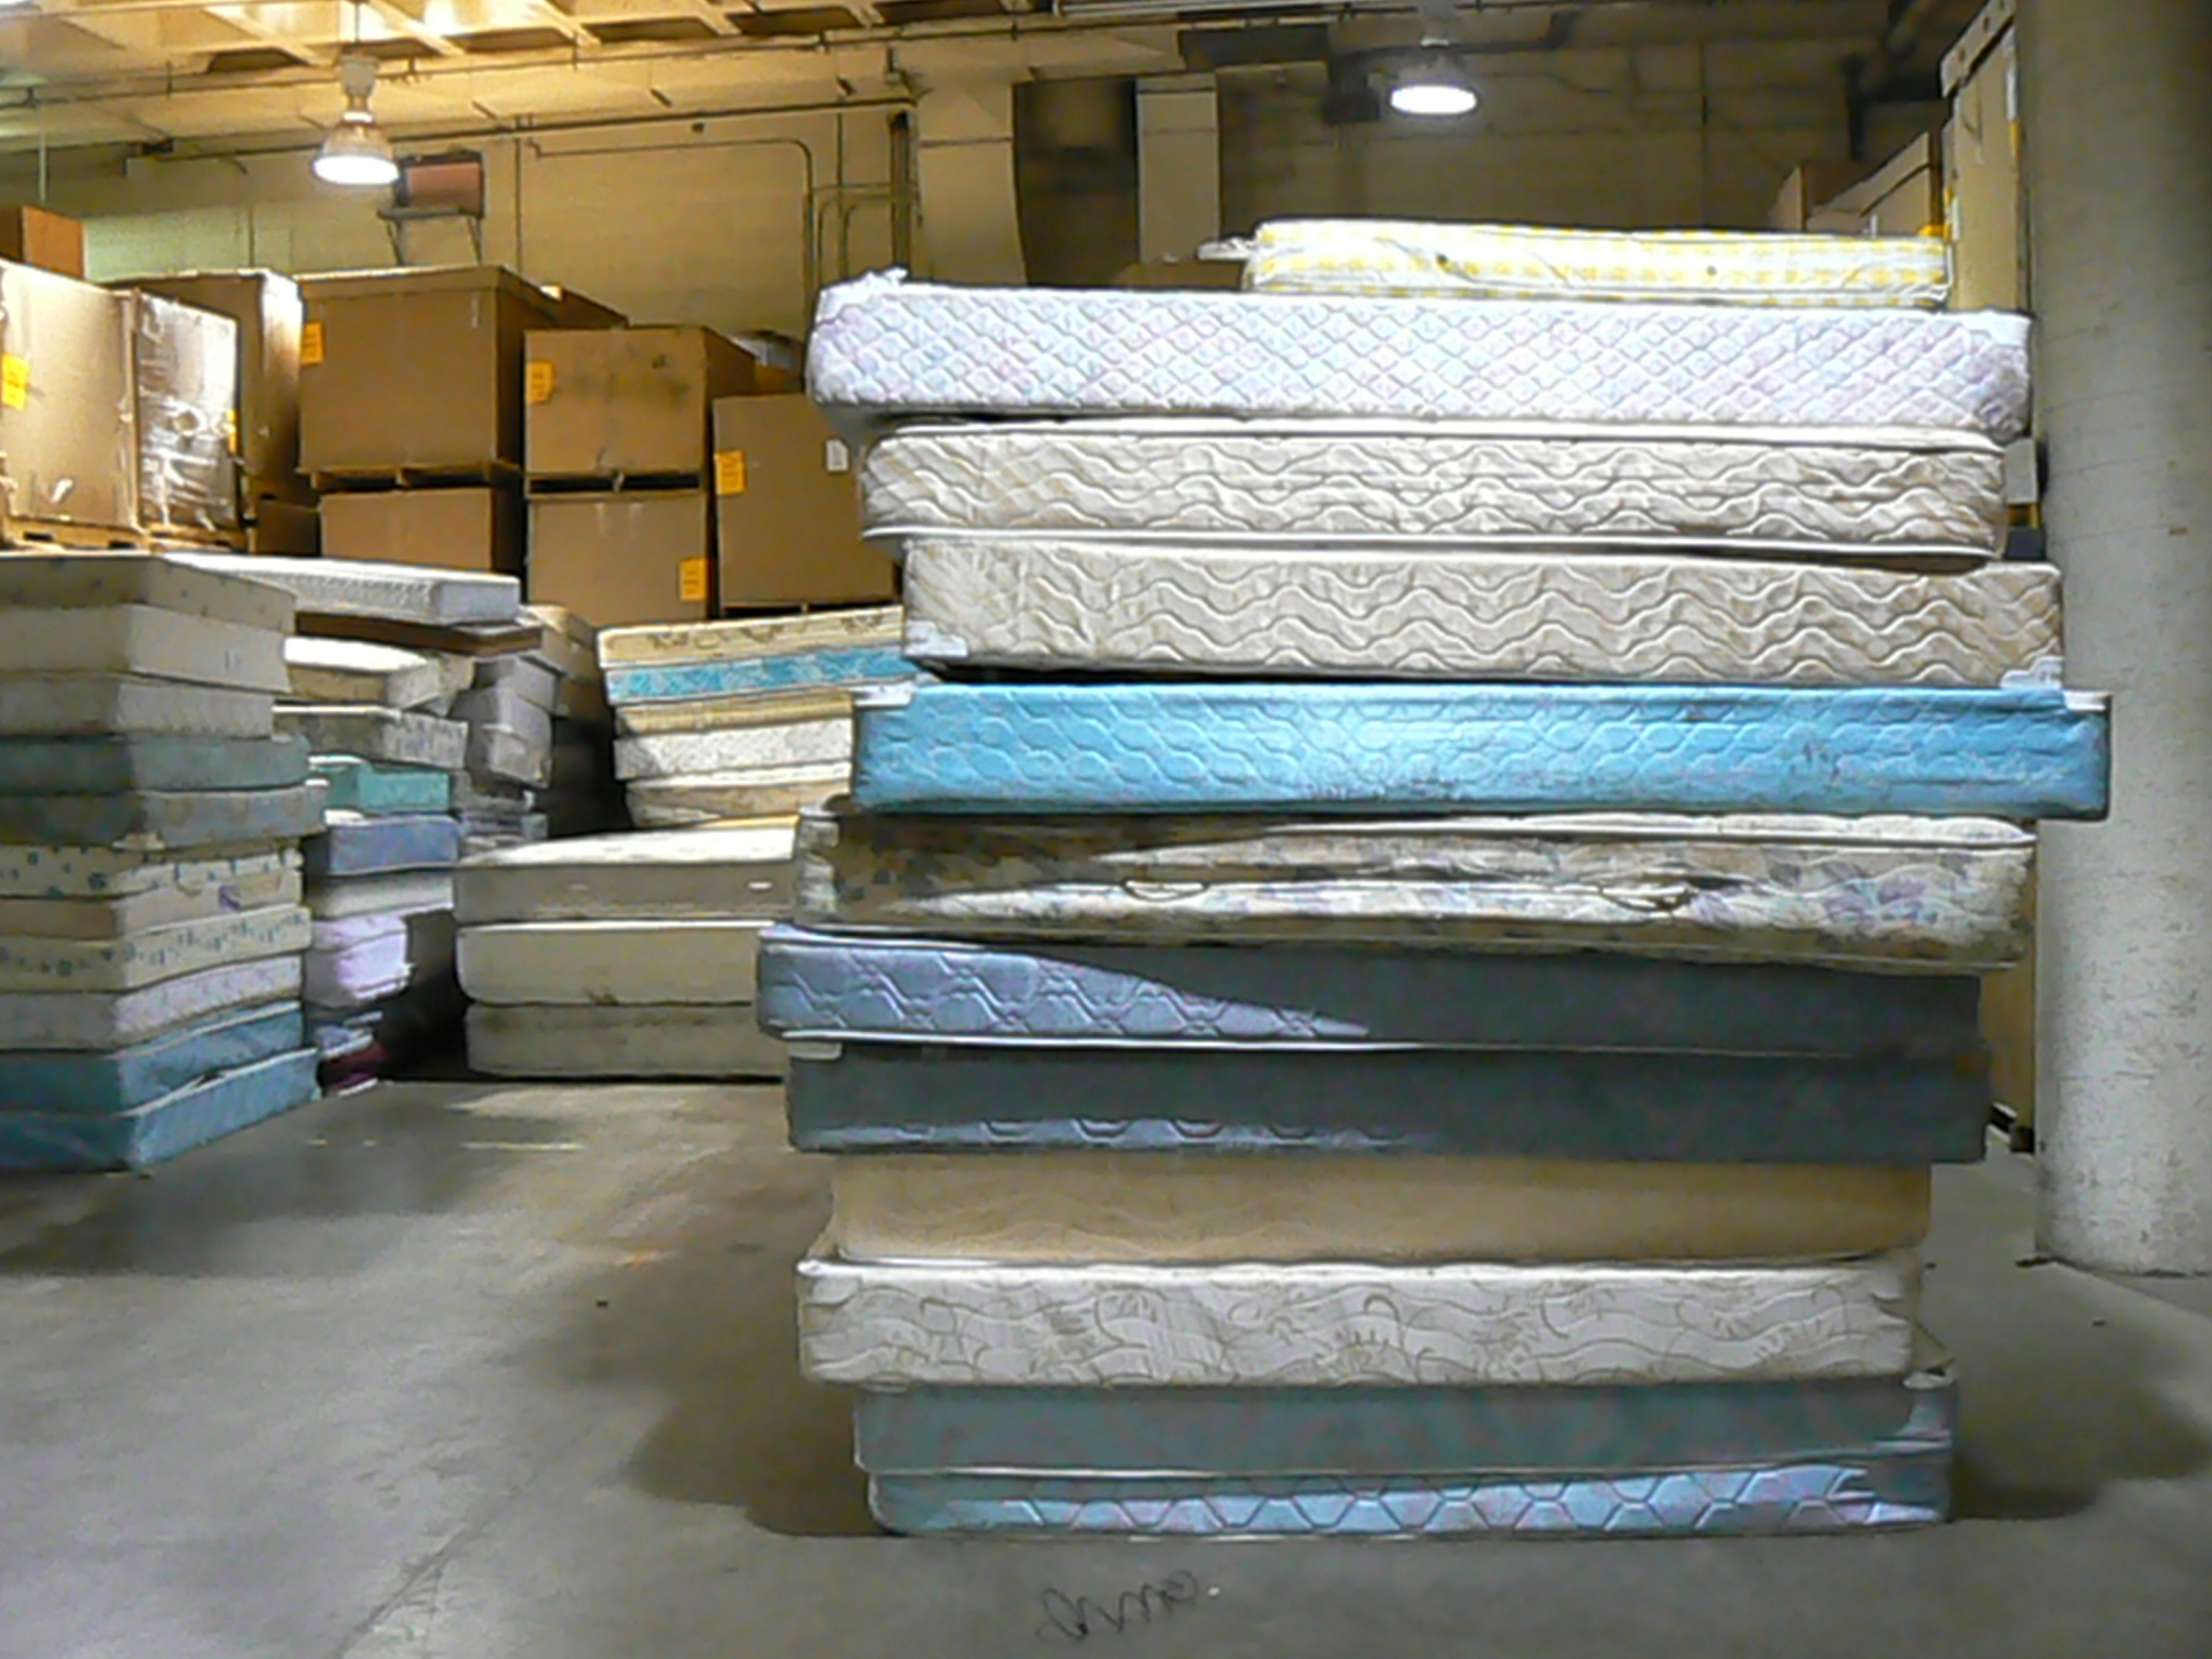 can mattresses be donated